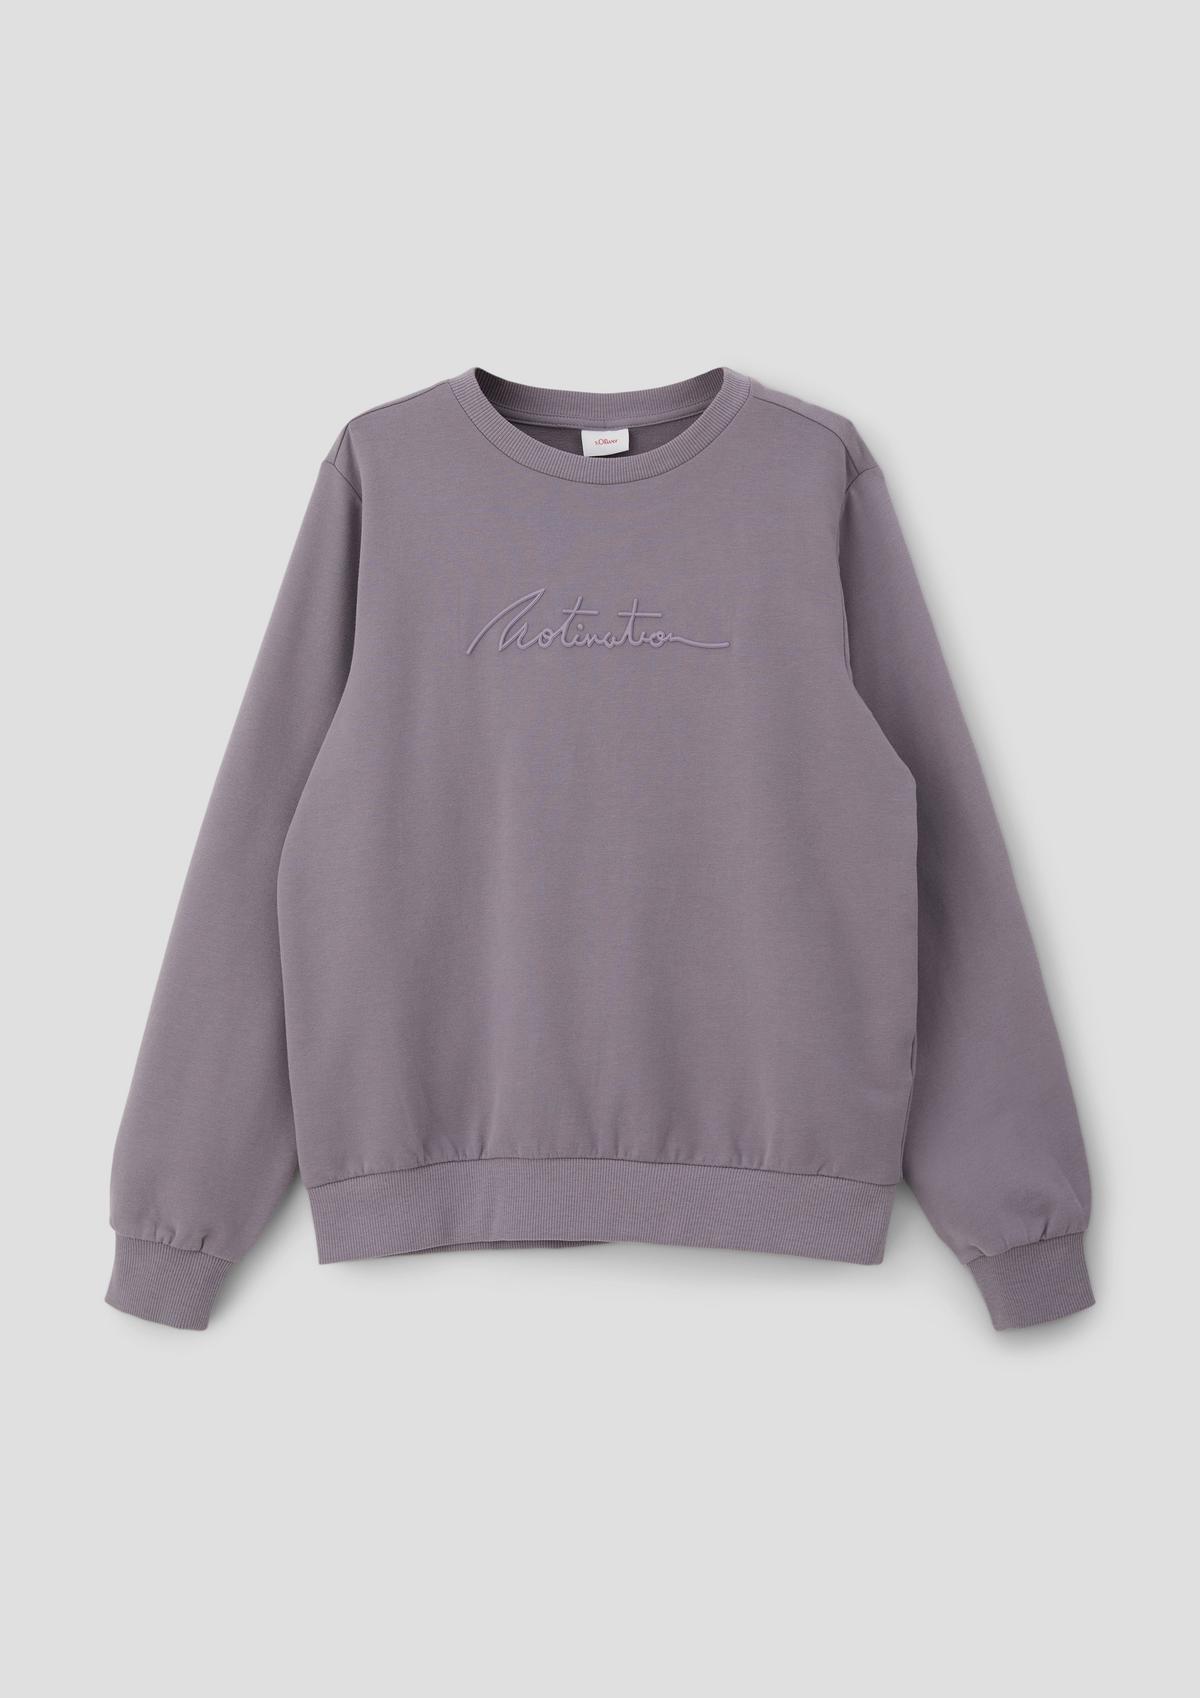 s.Oliver Sweatshirt with a rubberised statement print